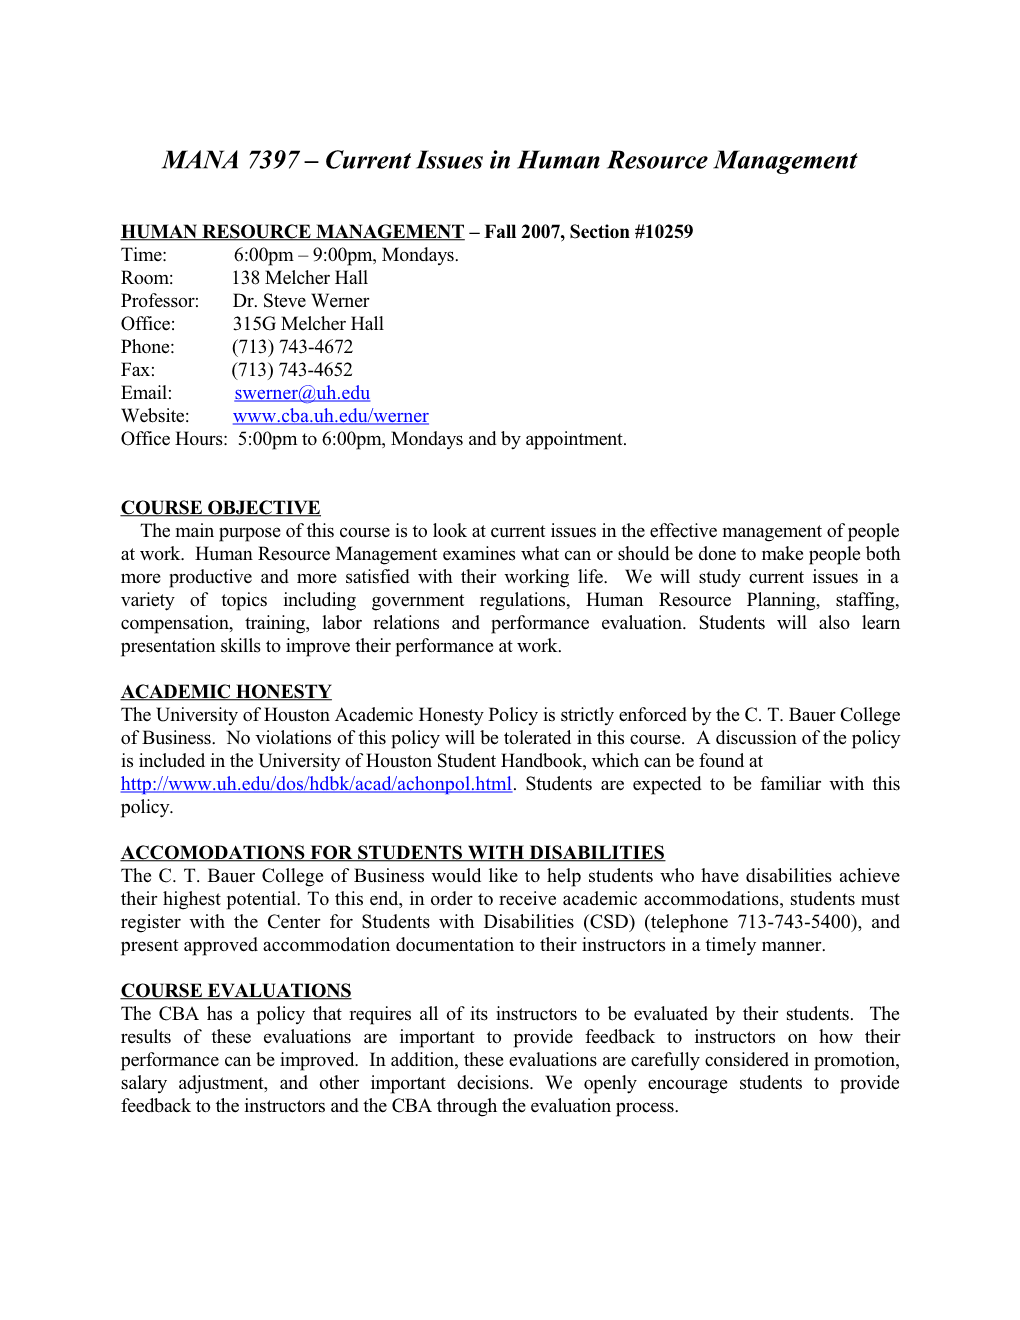 MANA 7397 Current Issues in Human Resource Management